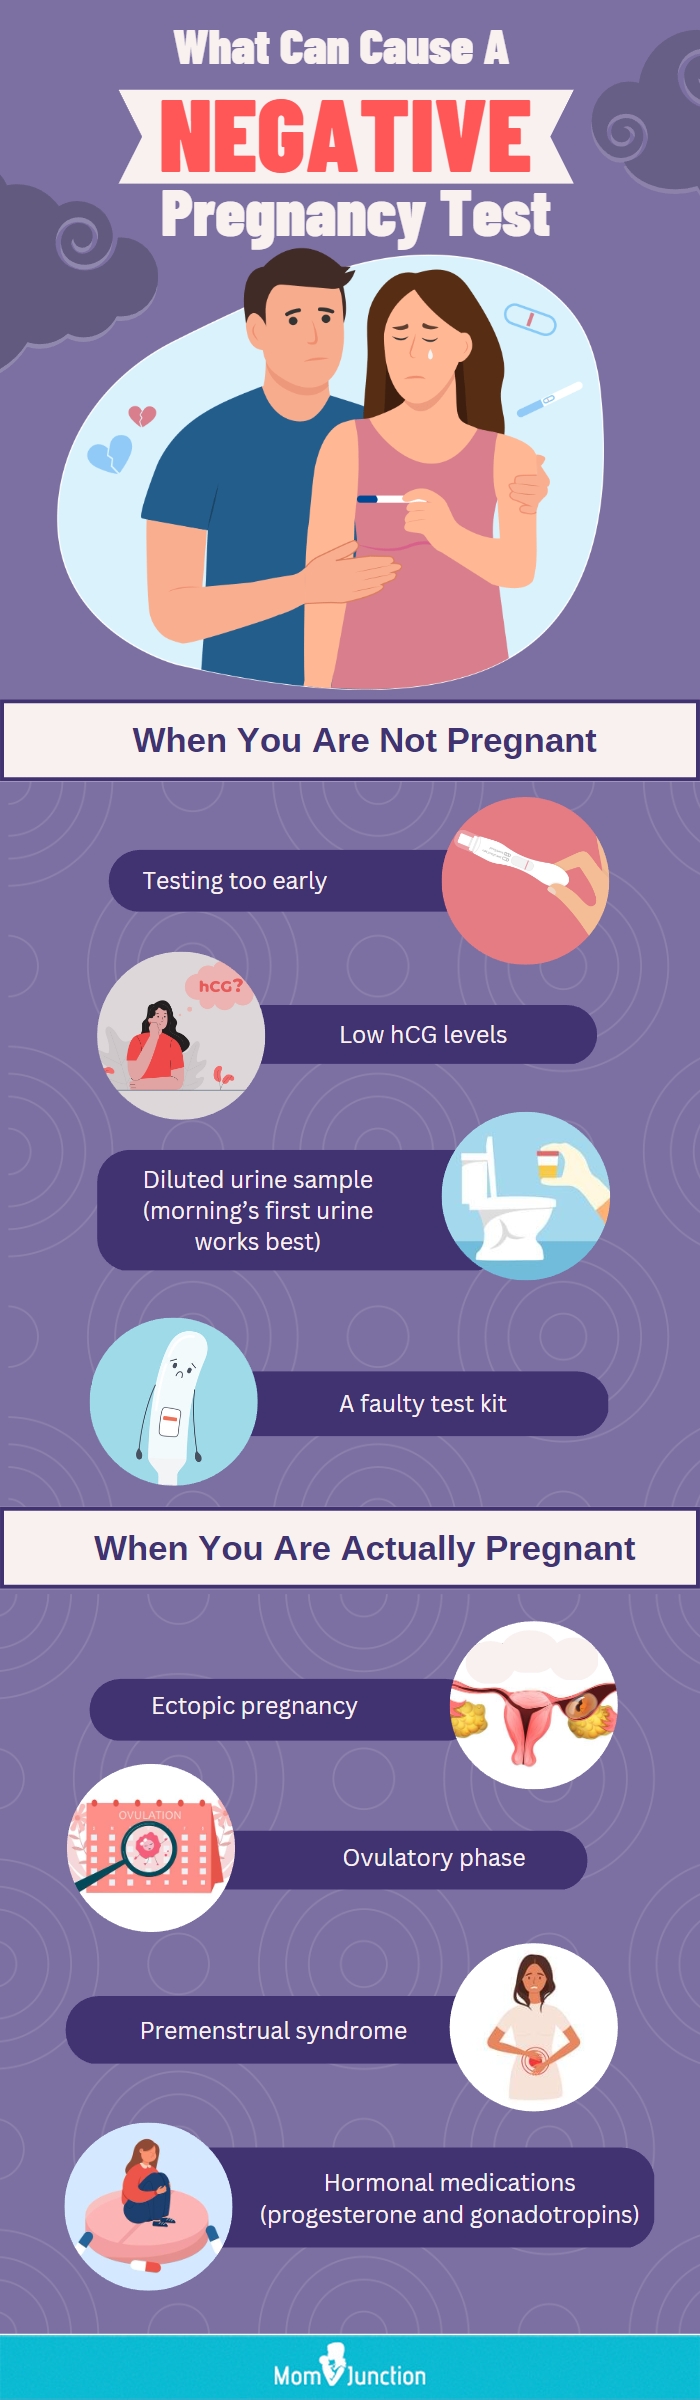 what can cause a negative pregnancy test (infographic)